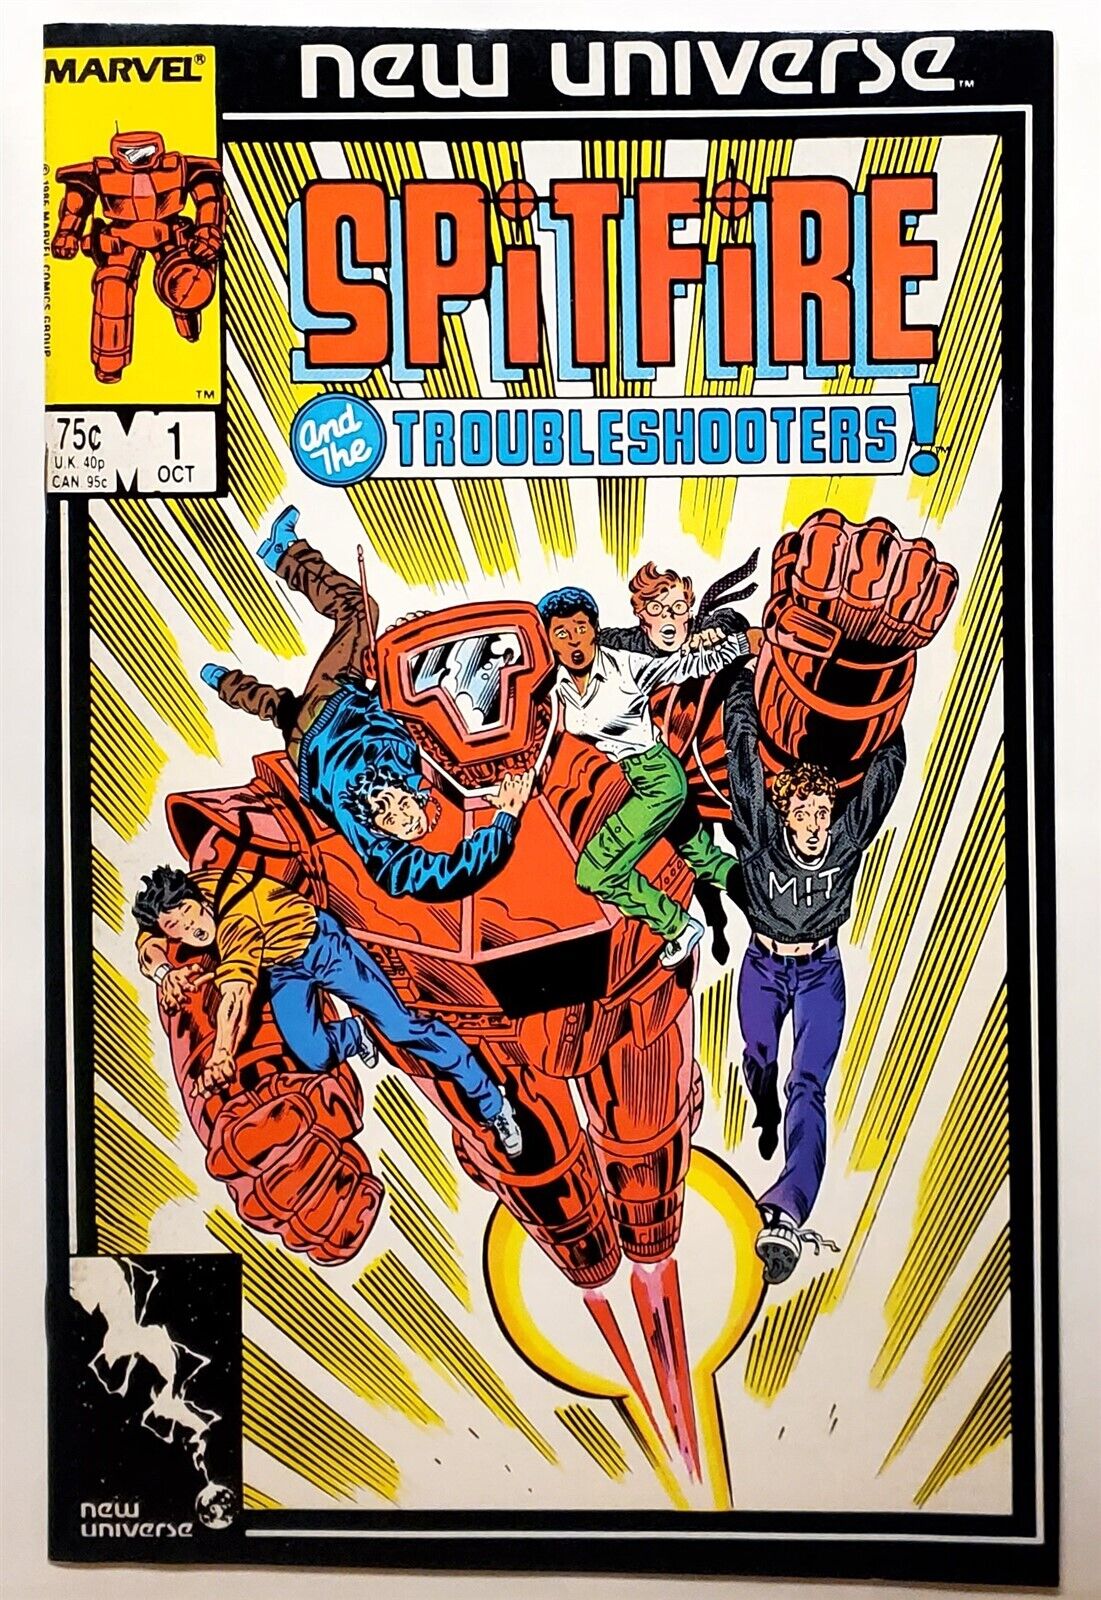 Spitfire and the Troubleshooters #1 (Oct 1986, Marvel) 7.0 FN/VF 